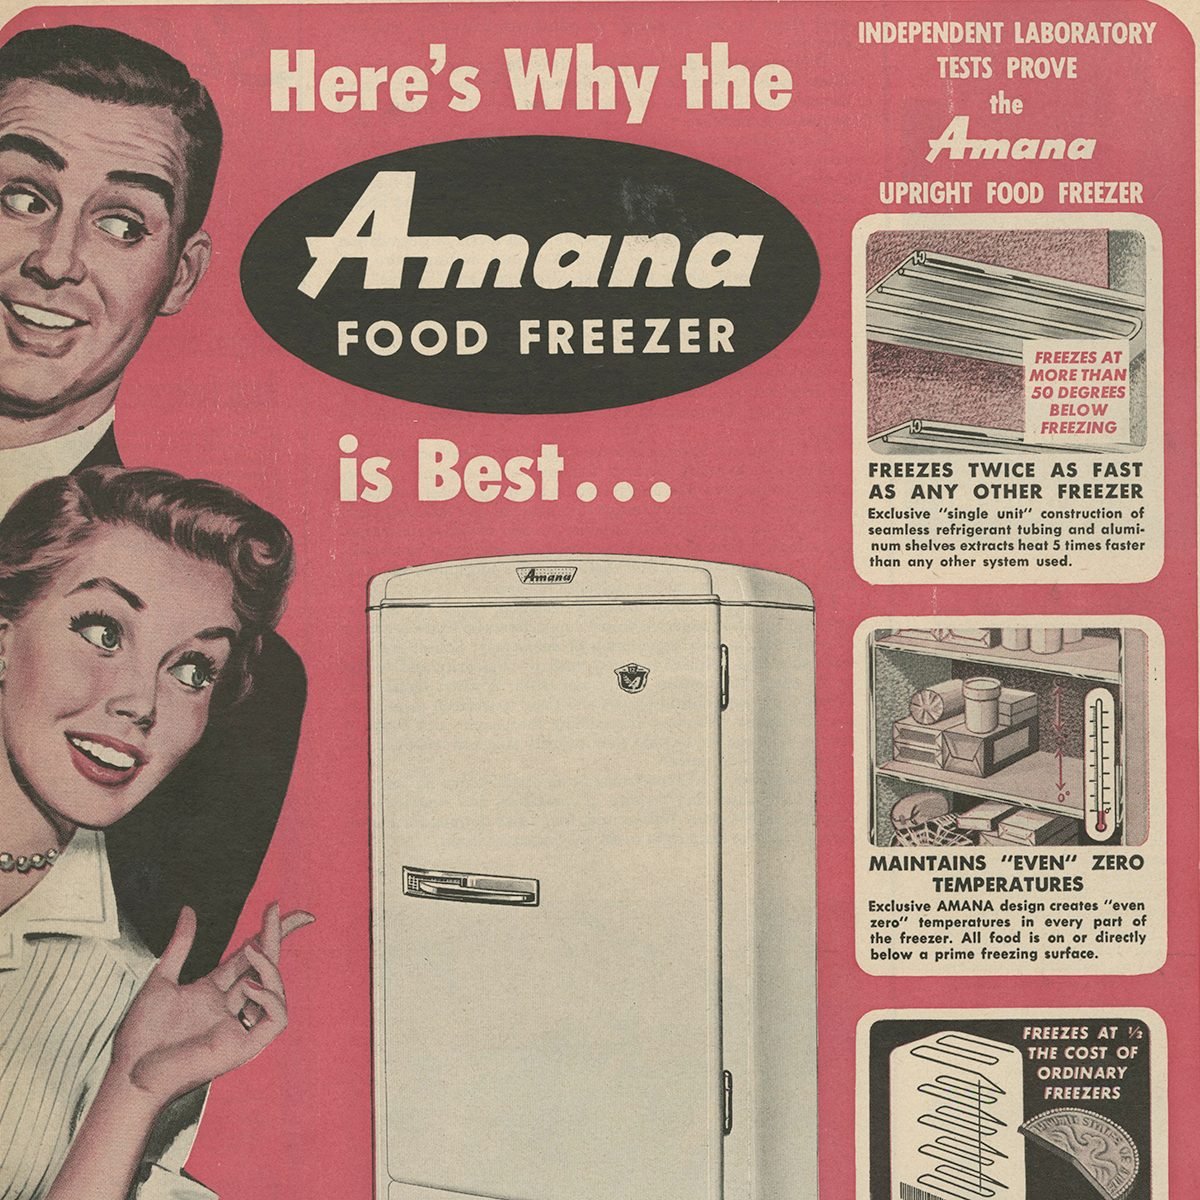 The 50s Are Back..Appliance Trends!